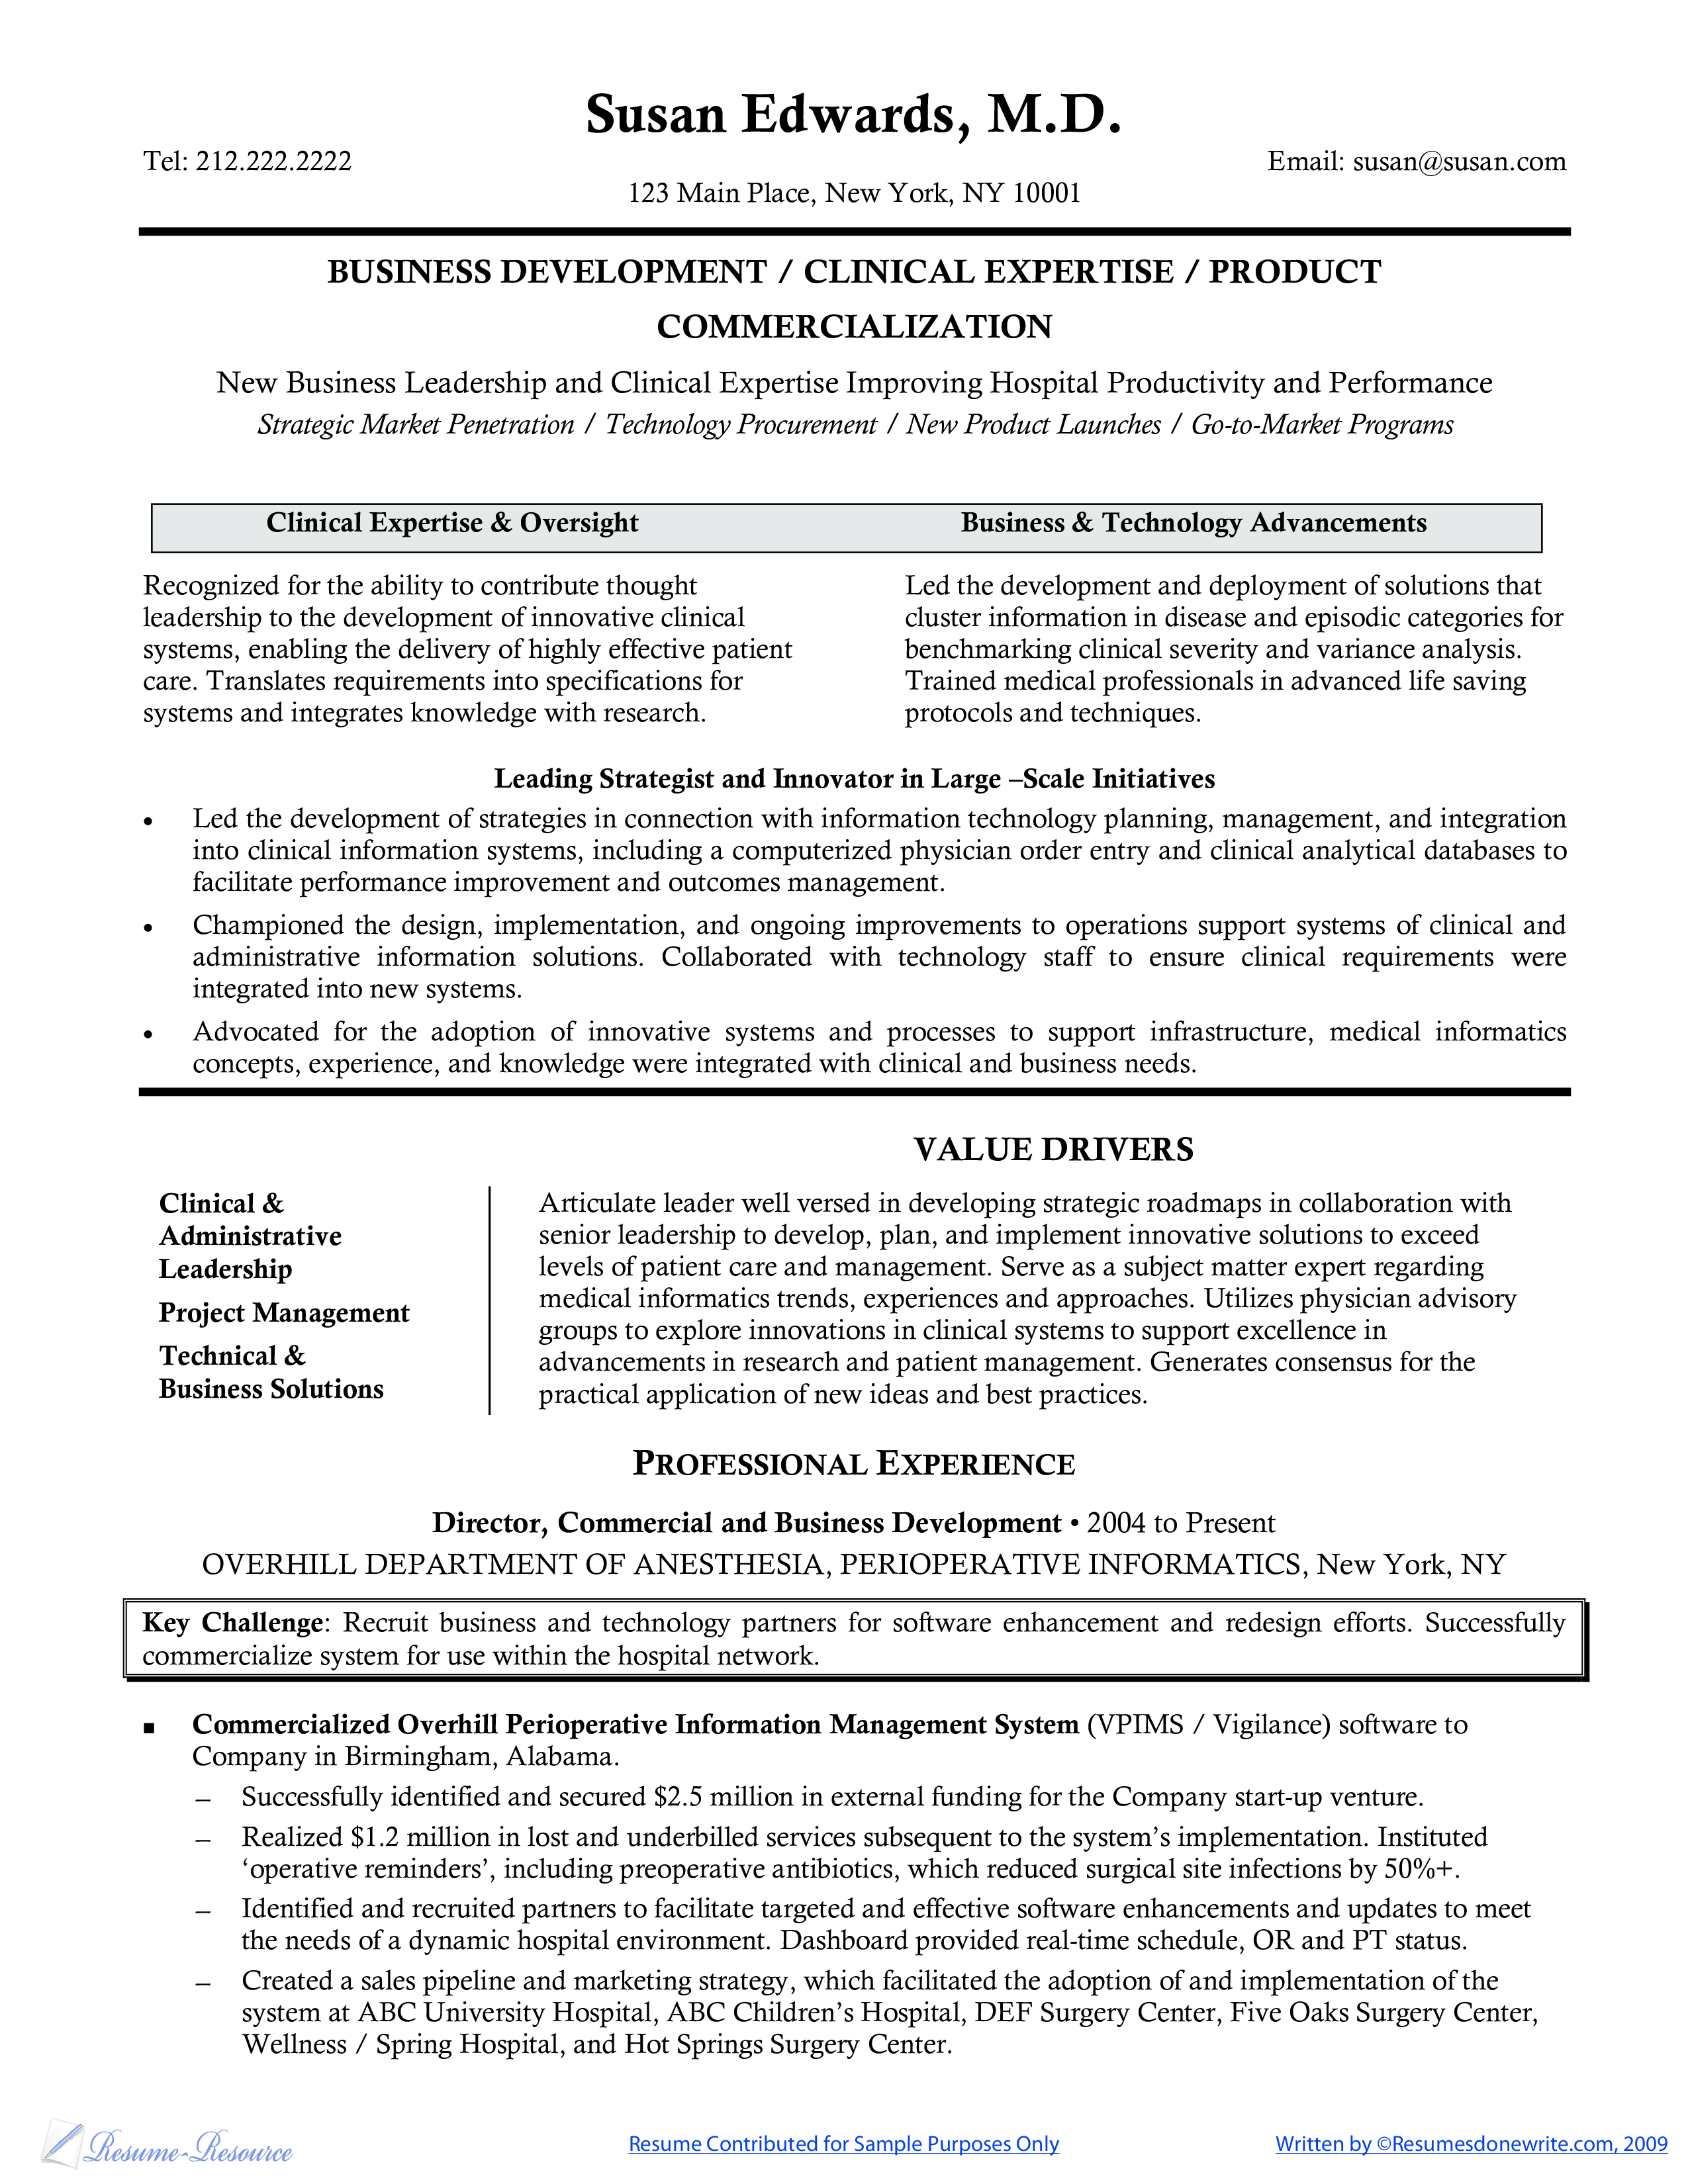 sample resume for clinical research project manager